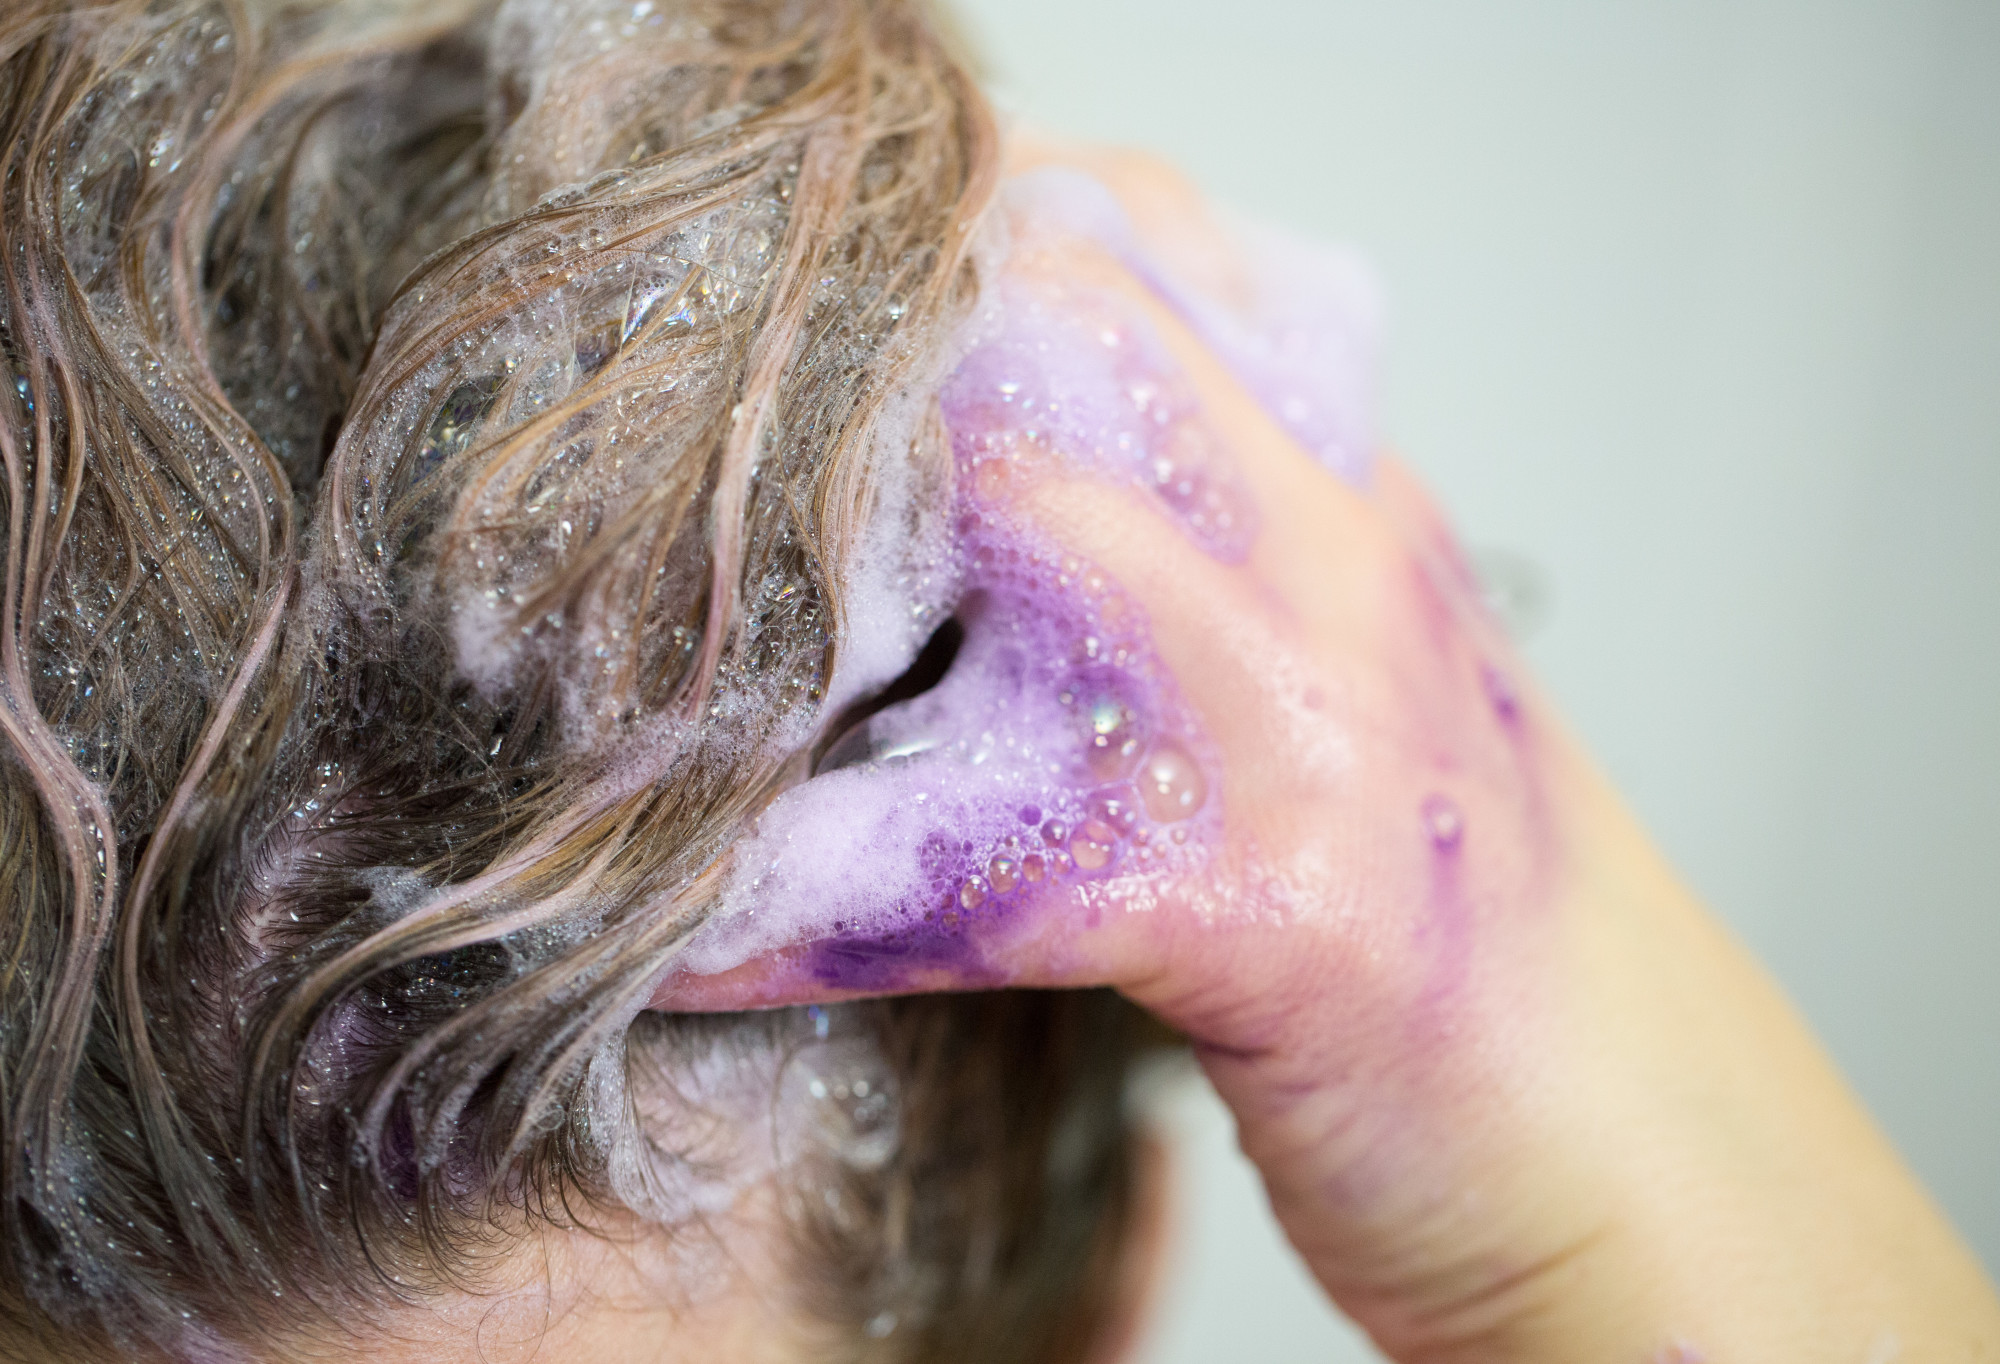 Someone massages vibrant purple Daddy-O shampoo into the back of their head, creating a mass of lilac coloured bubbles.